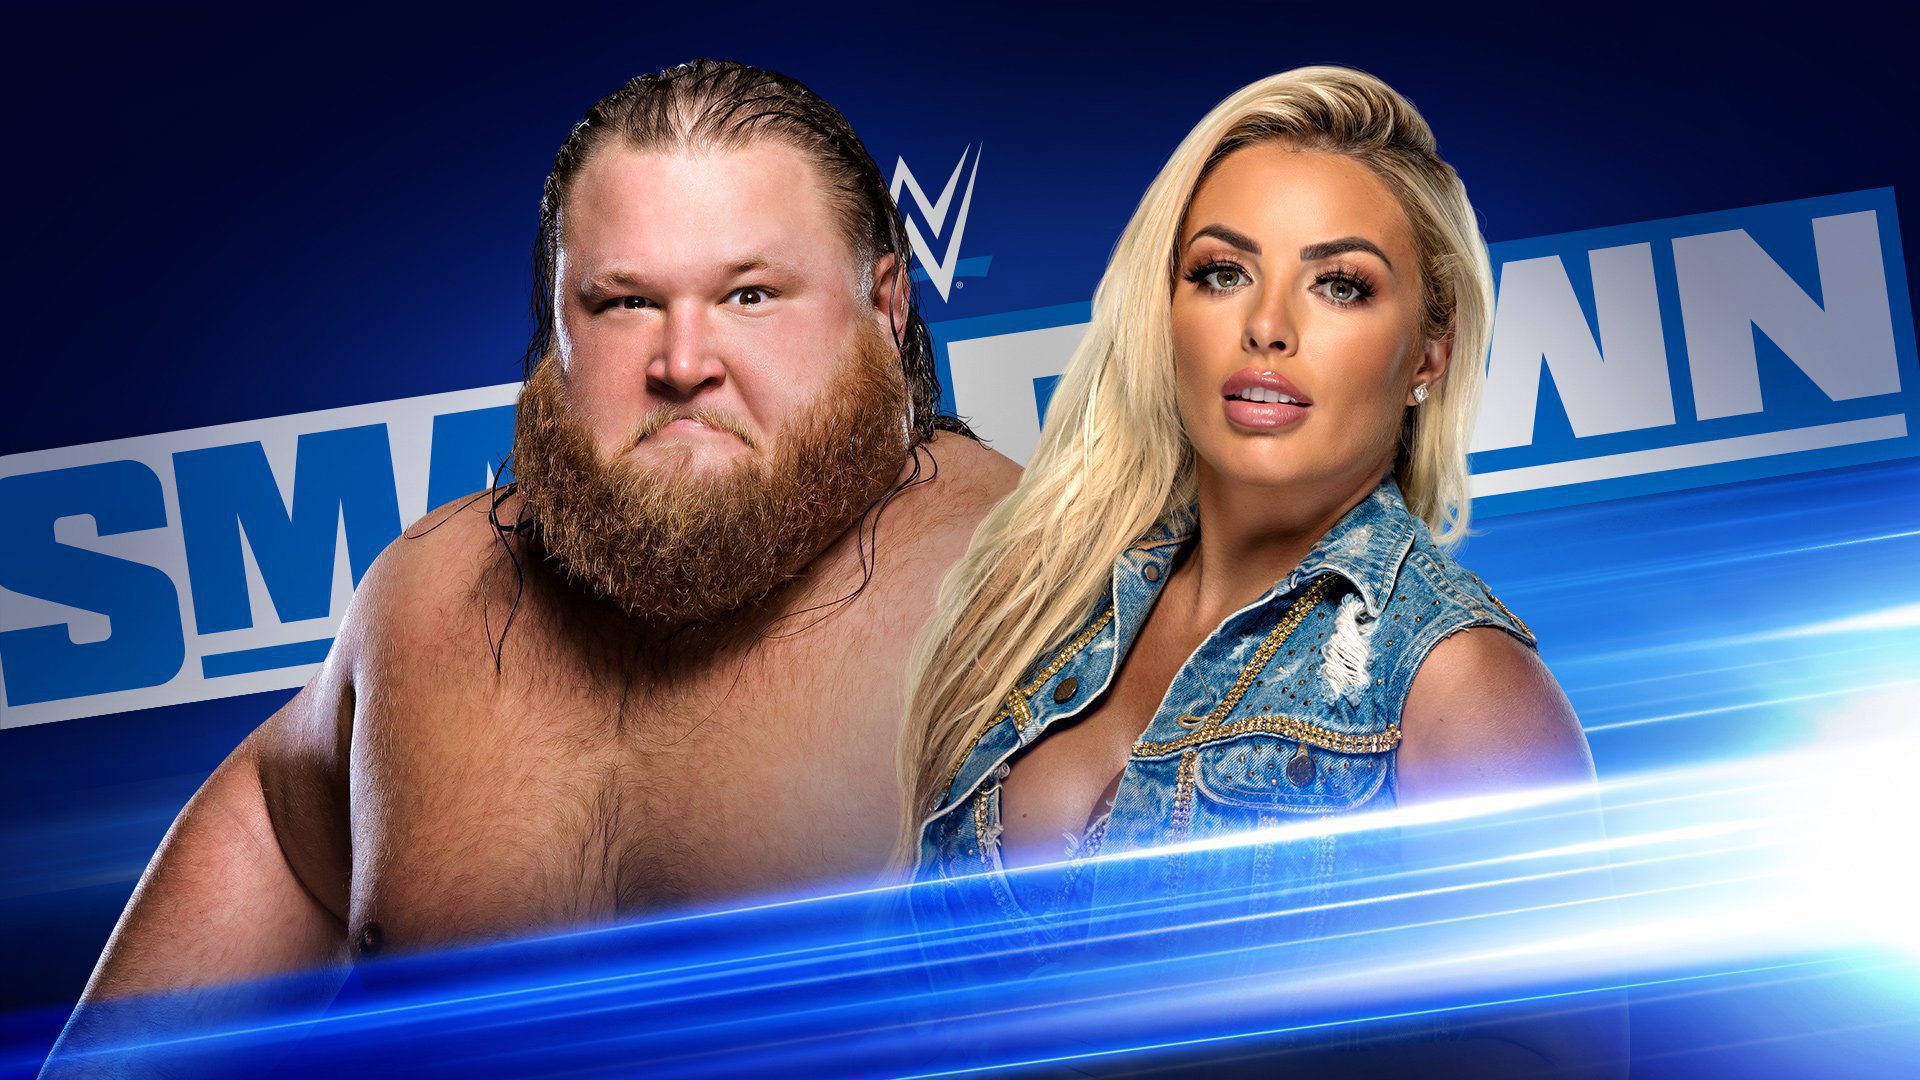 Otis and Mandy Rose’s love story continues on SmackDown WWE